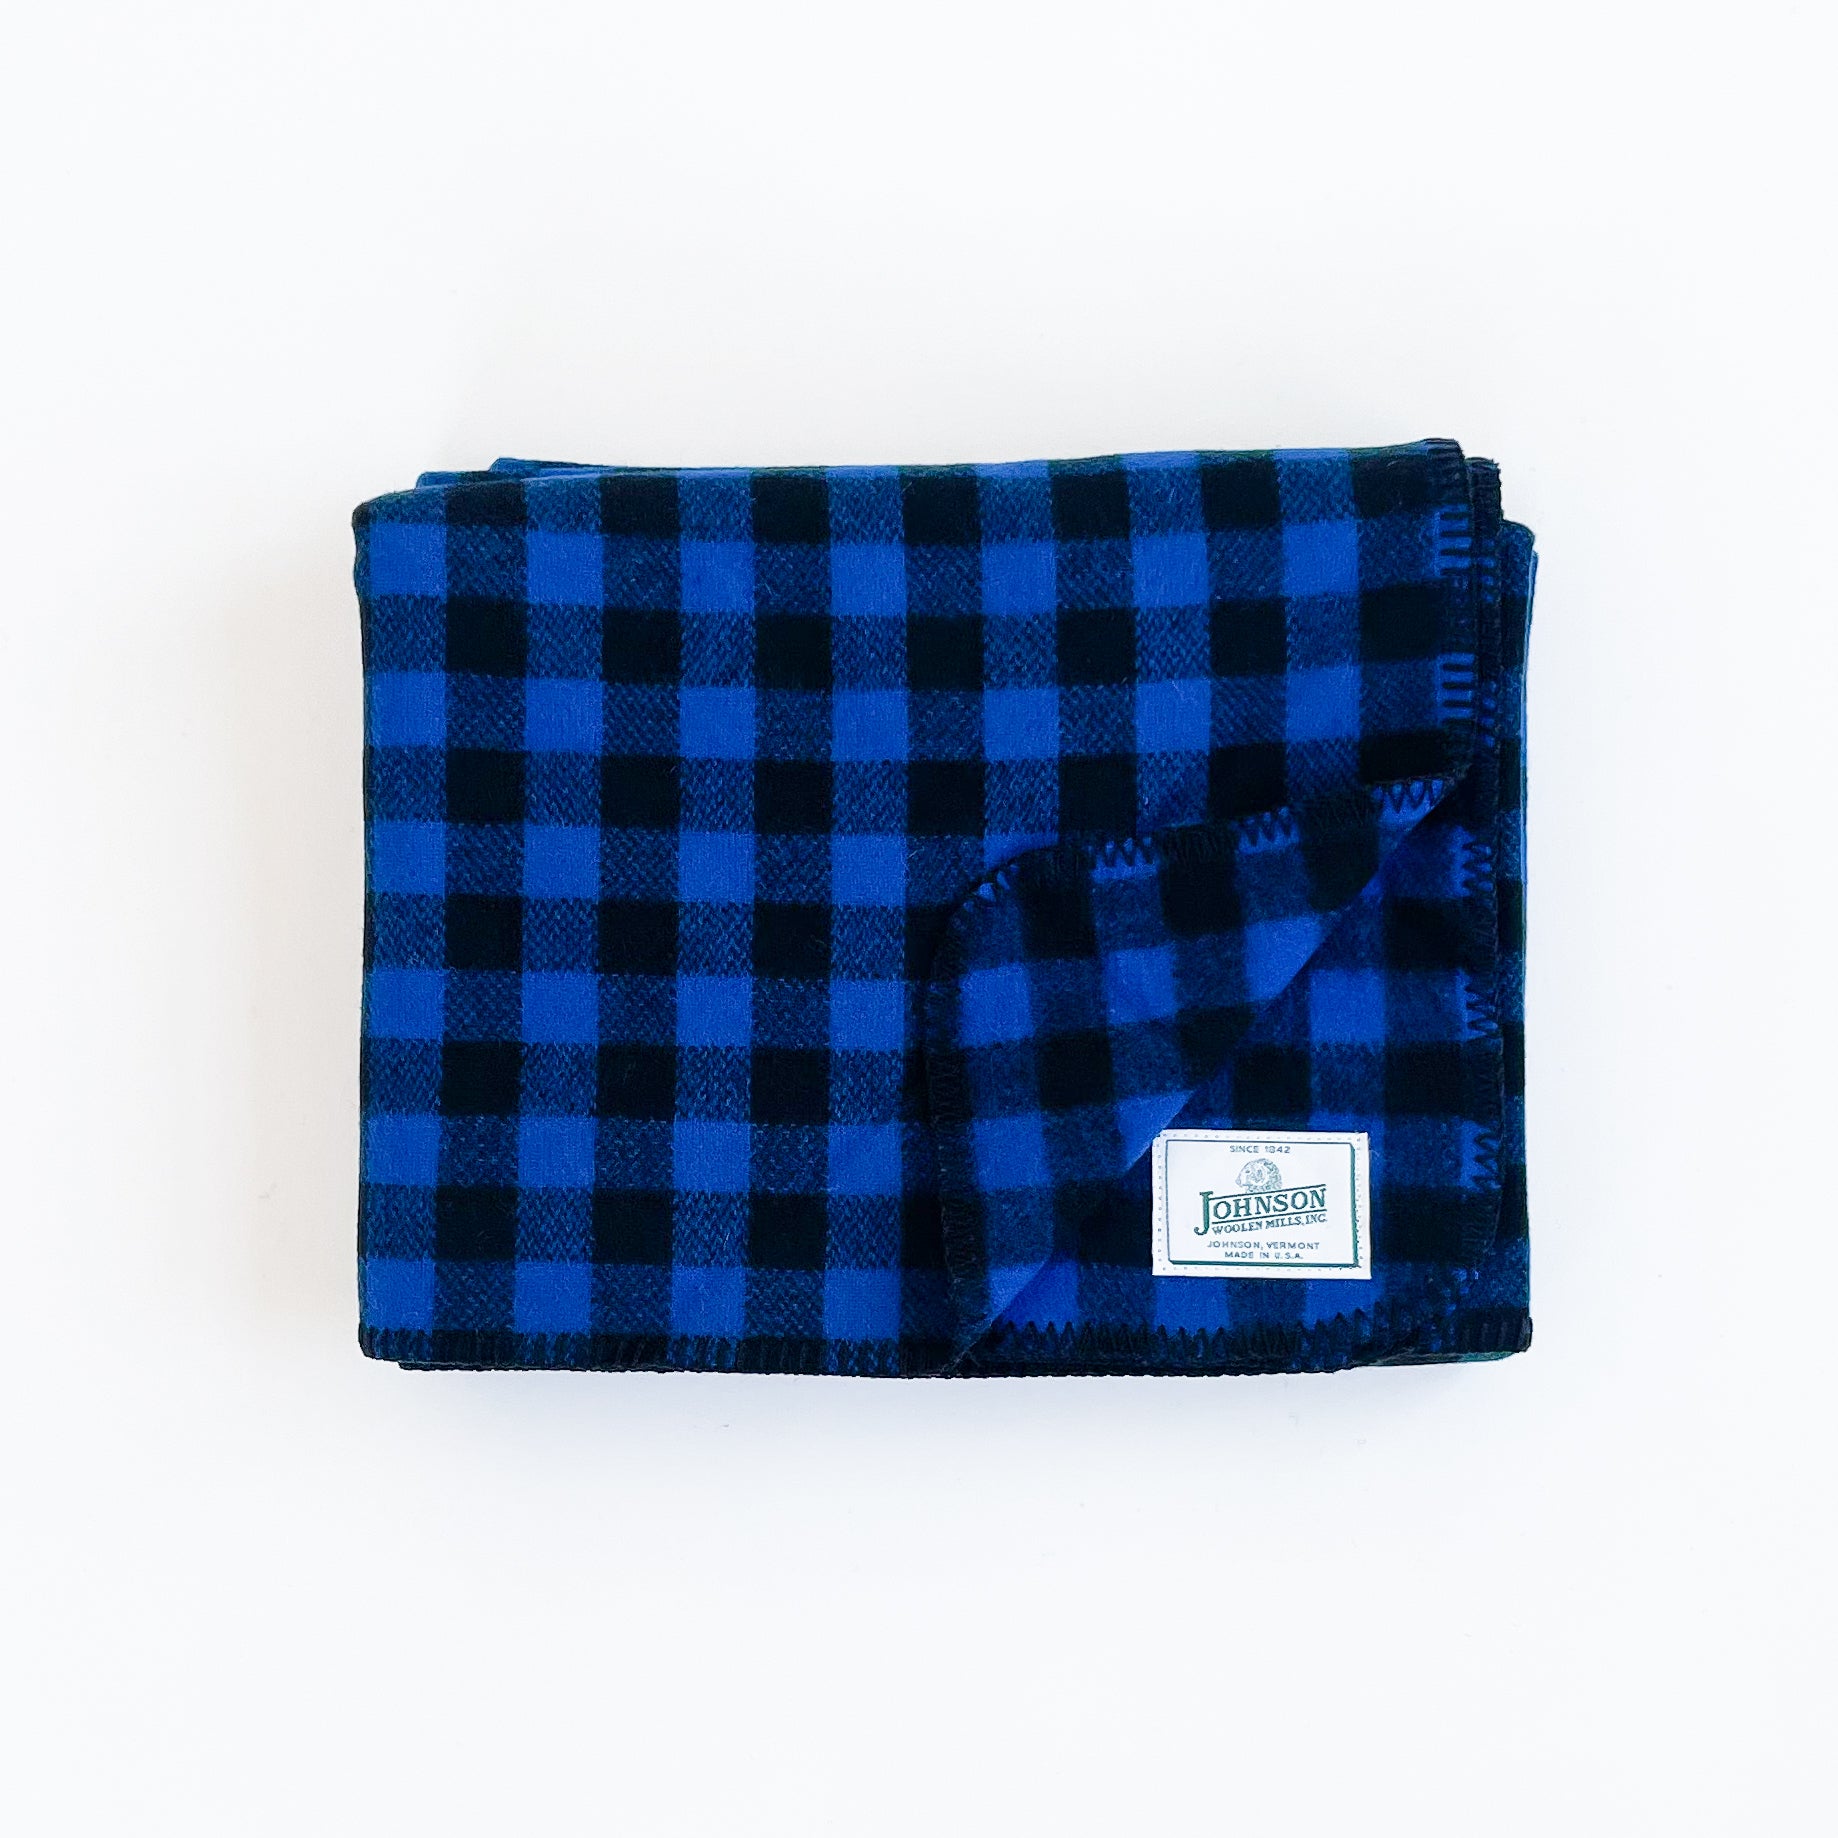 Johnson Woolen Mills throws Bluecheck, Blue & Black buffalo 1 inch squares folded front view